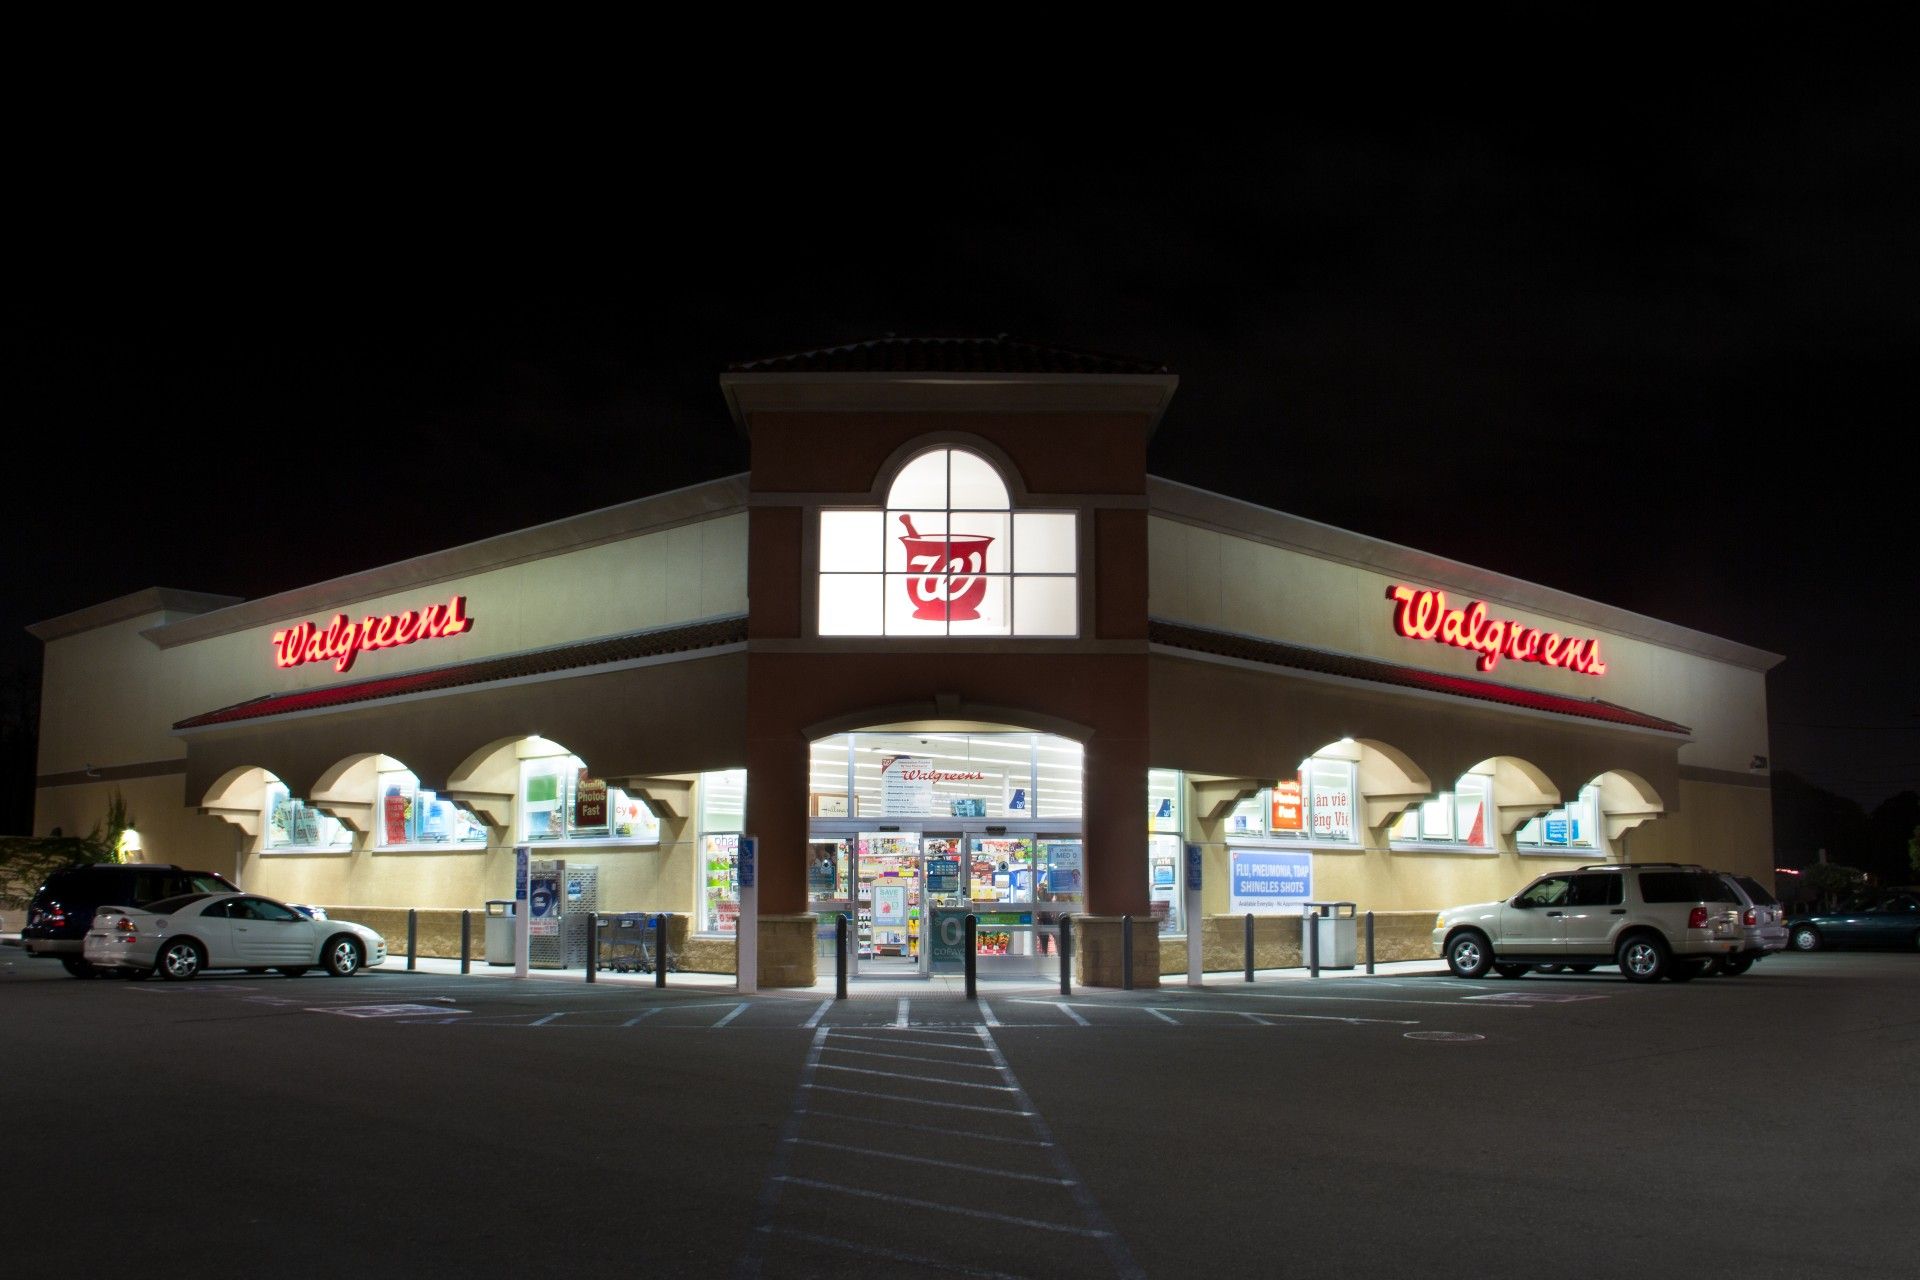 Walgreens store at night - facial recognition security cameras